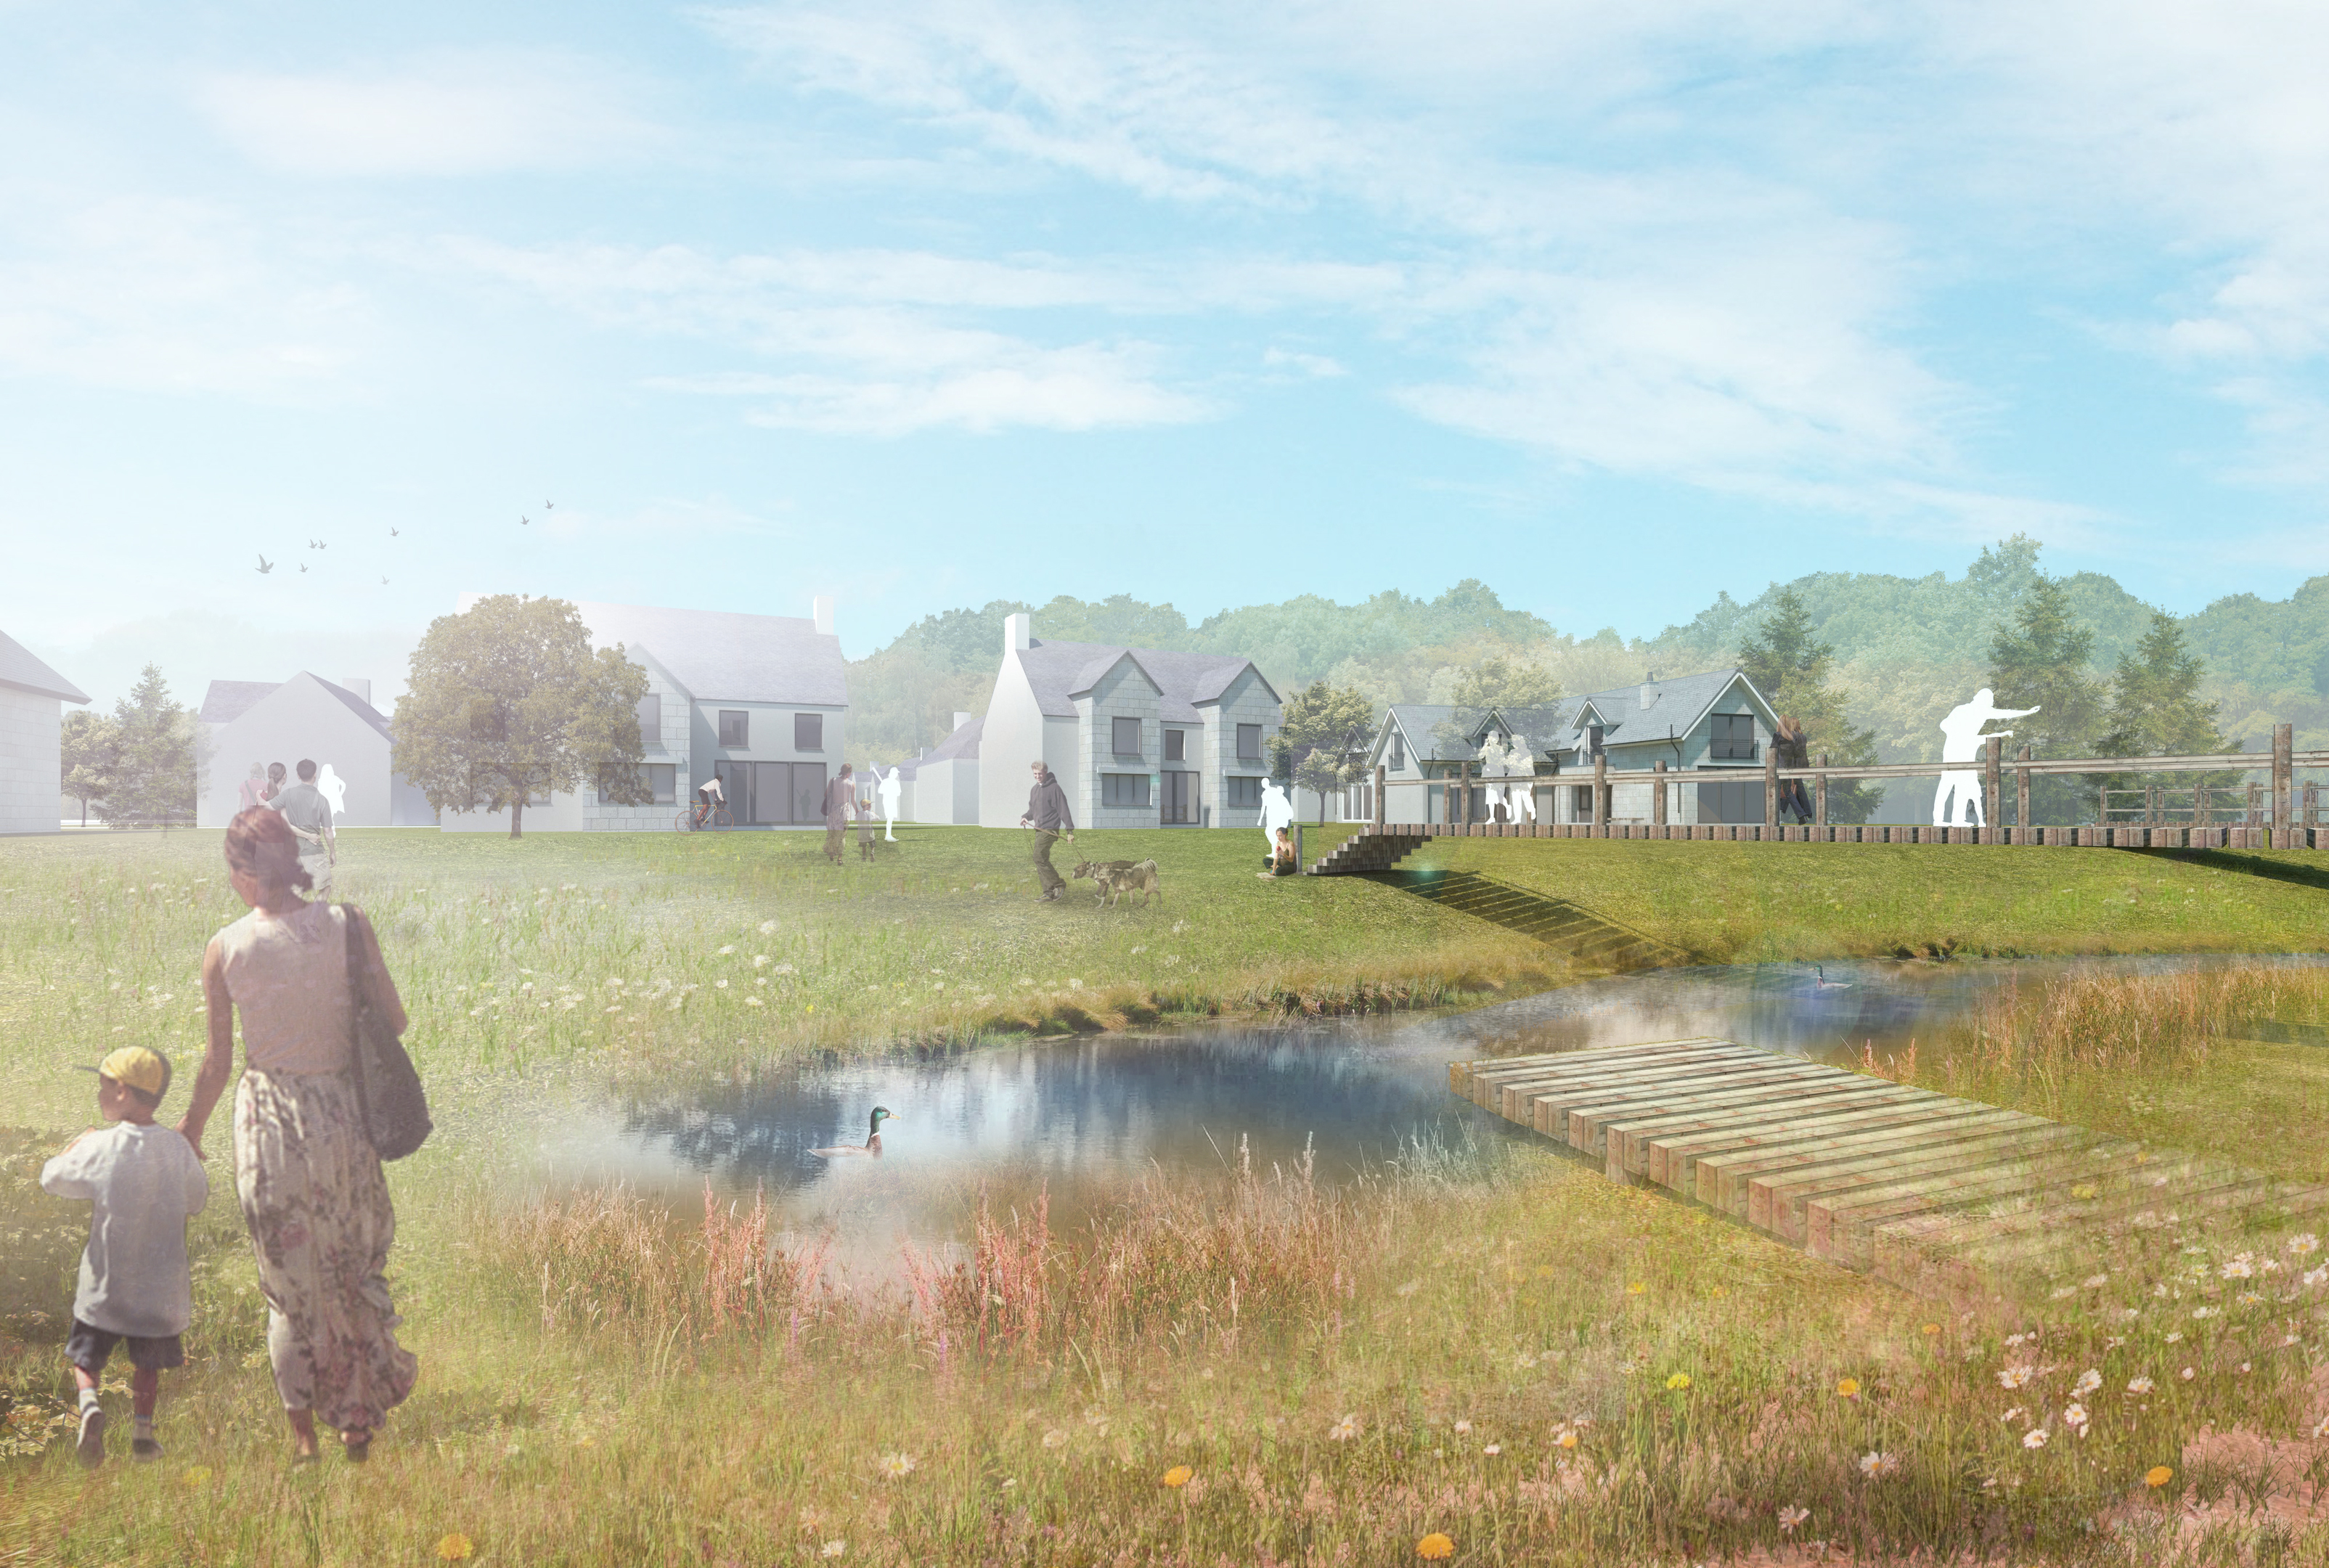 New images of the plans for 1,500-home Kincluny Village development in Drumoak.